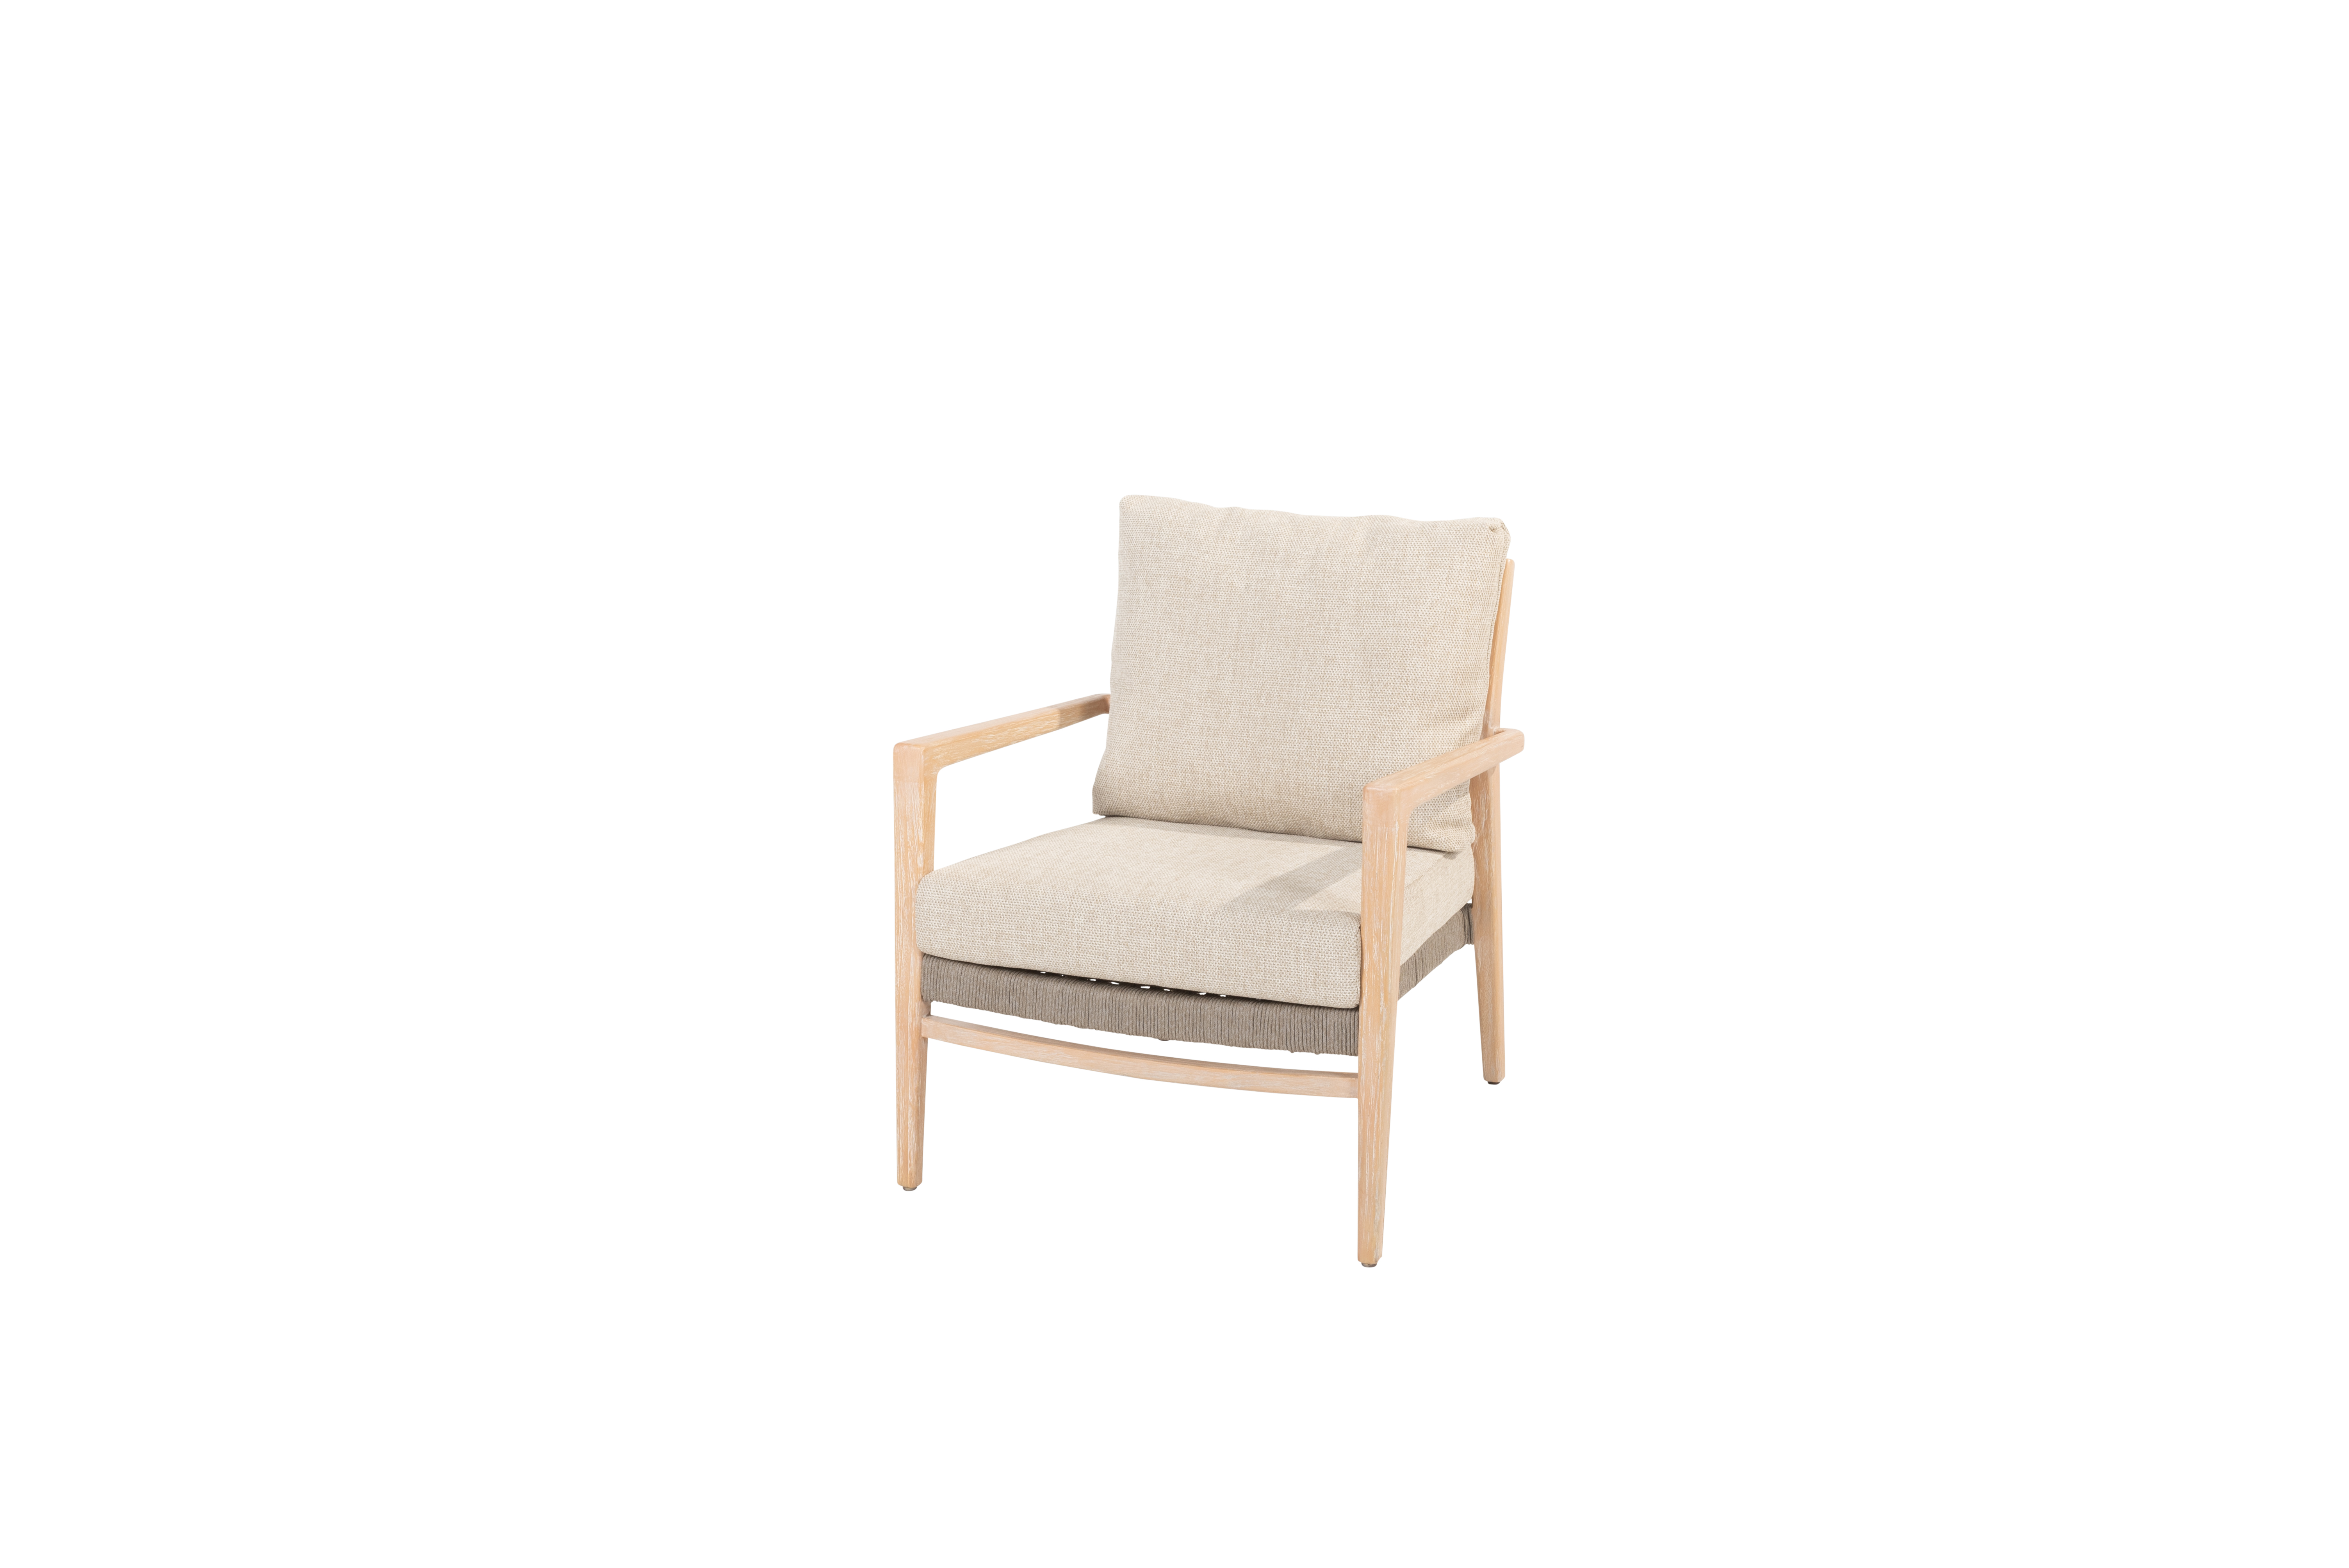 214036_ Julia low dining chair brushed teak with 2 cushions 01